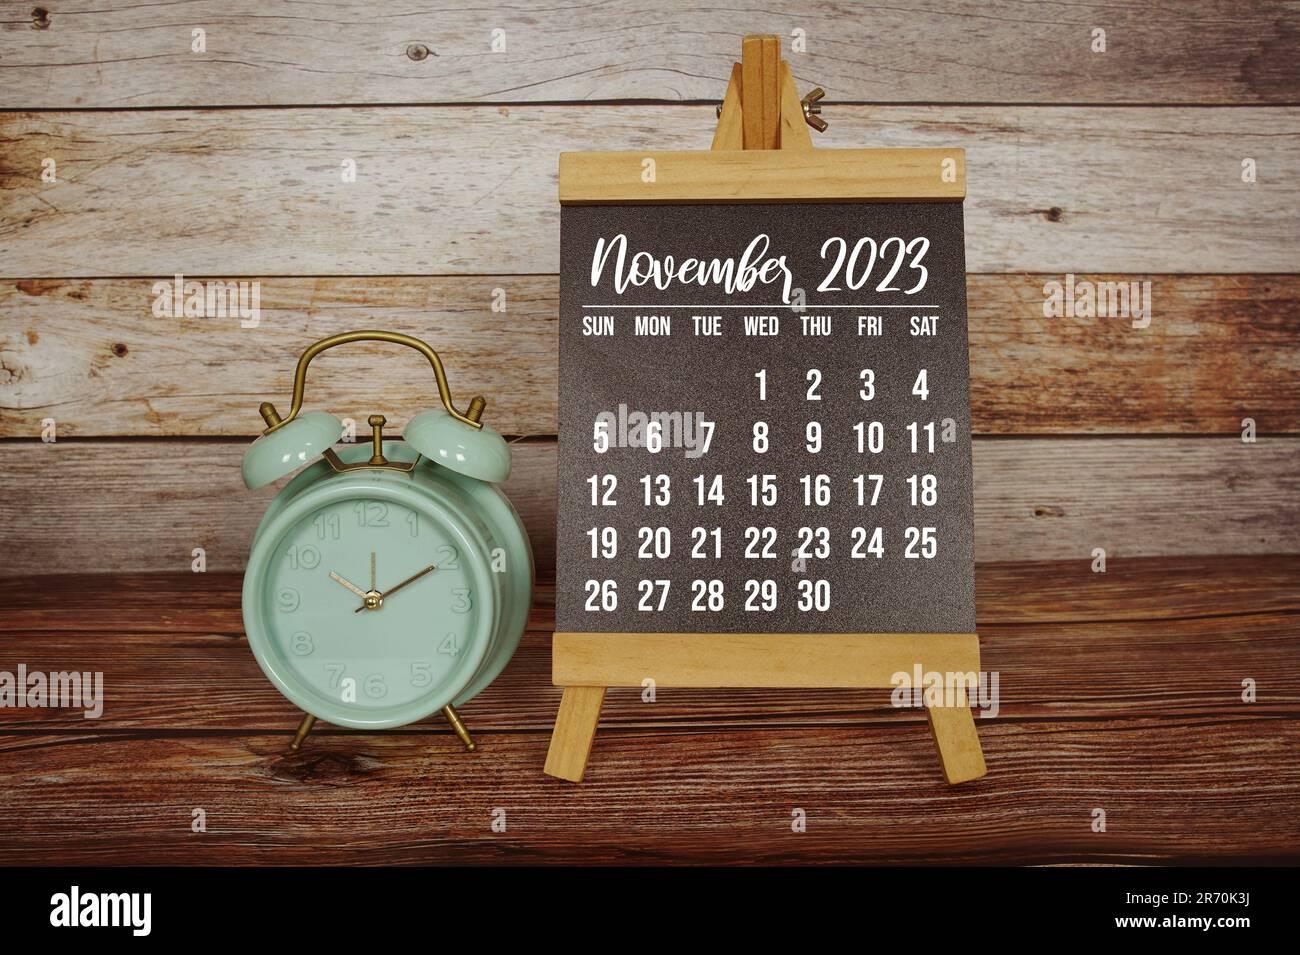 November Monthly Calendar And Alarm Clock On Wooden